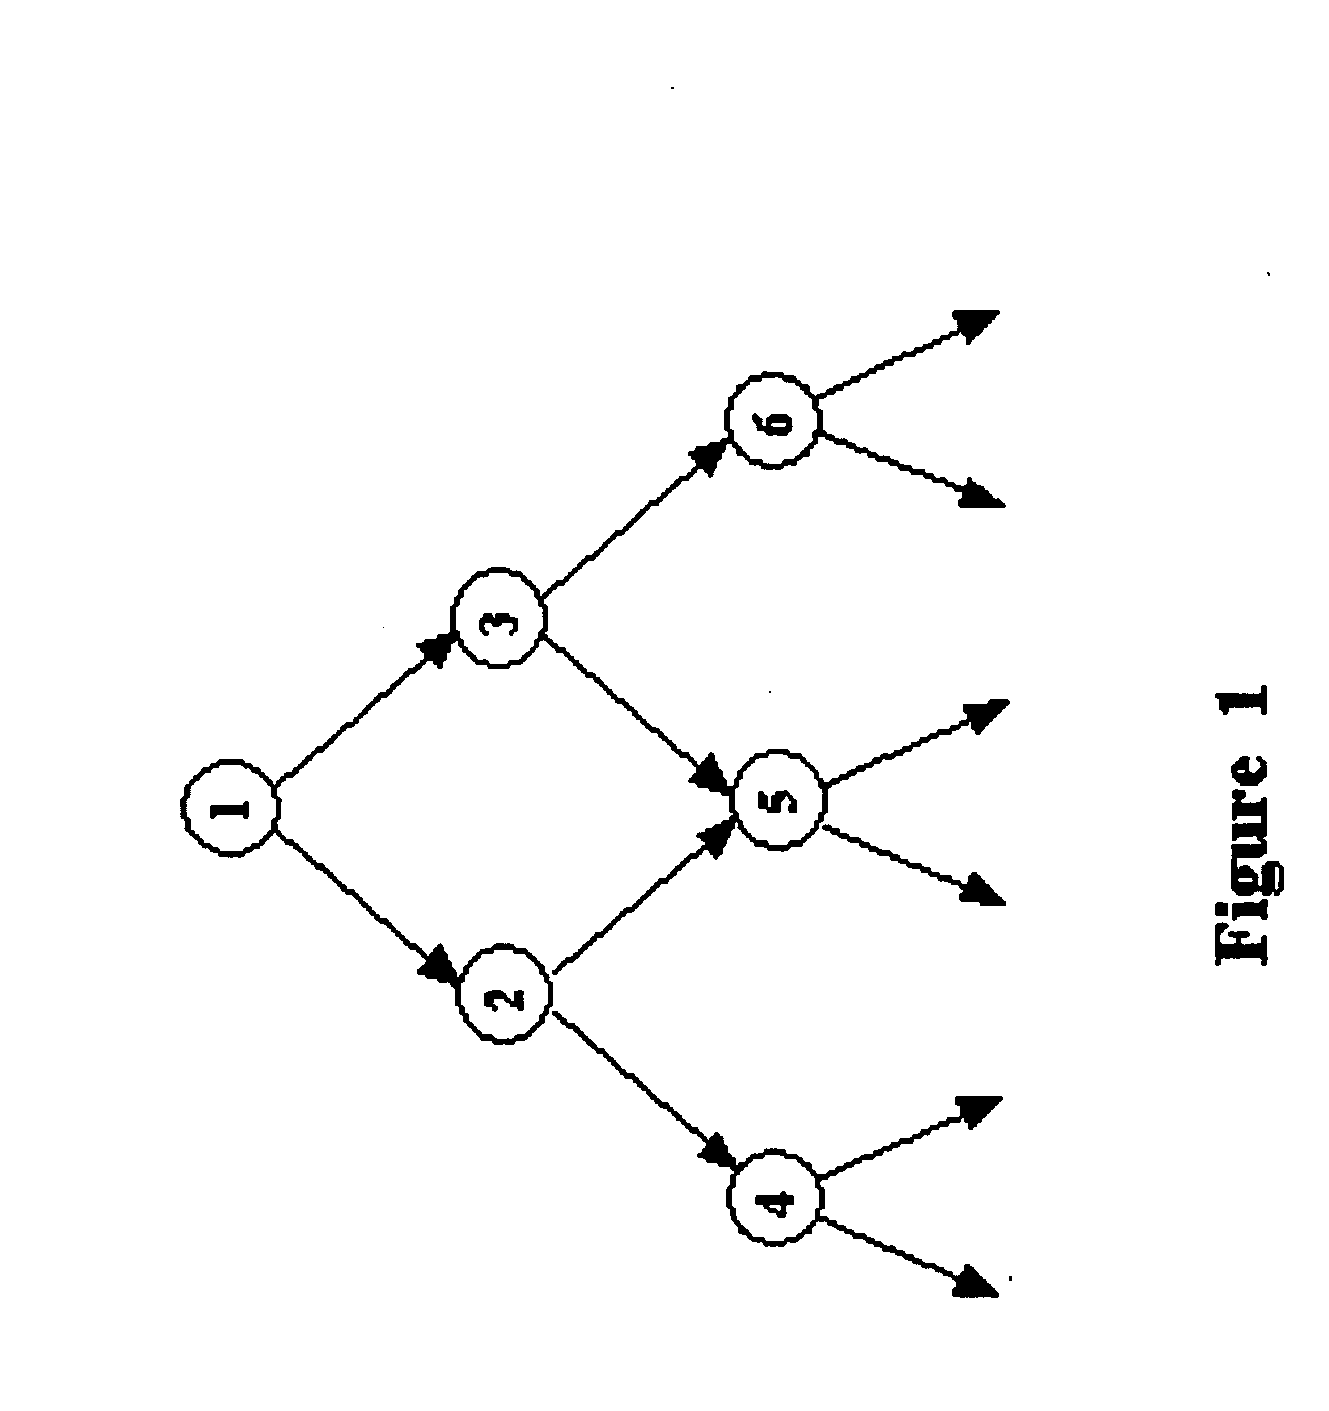 Method for executing structured symbolic machine code on a microprocessor